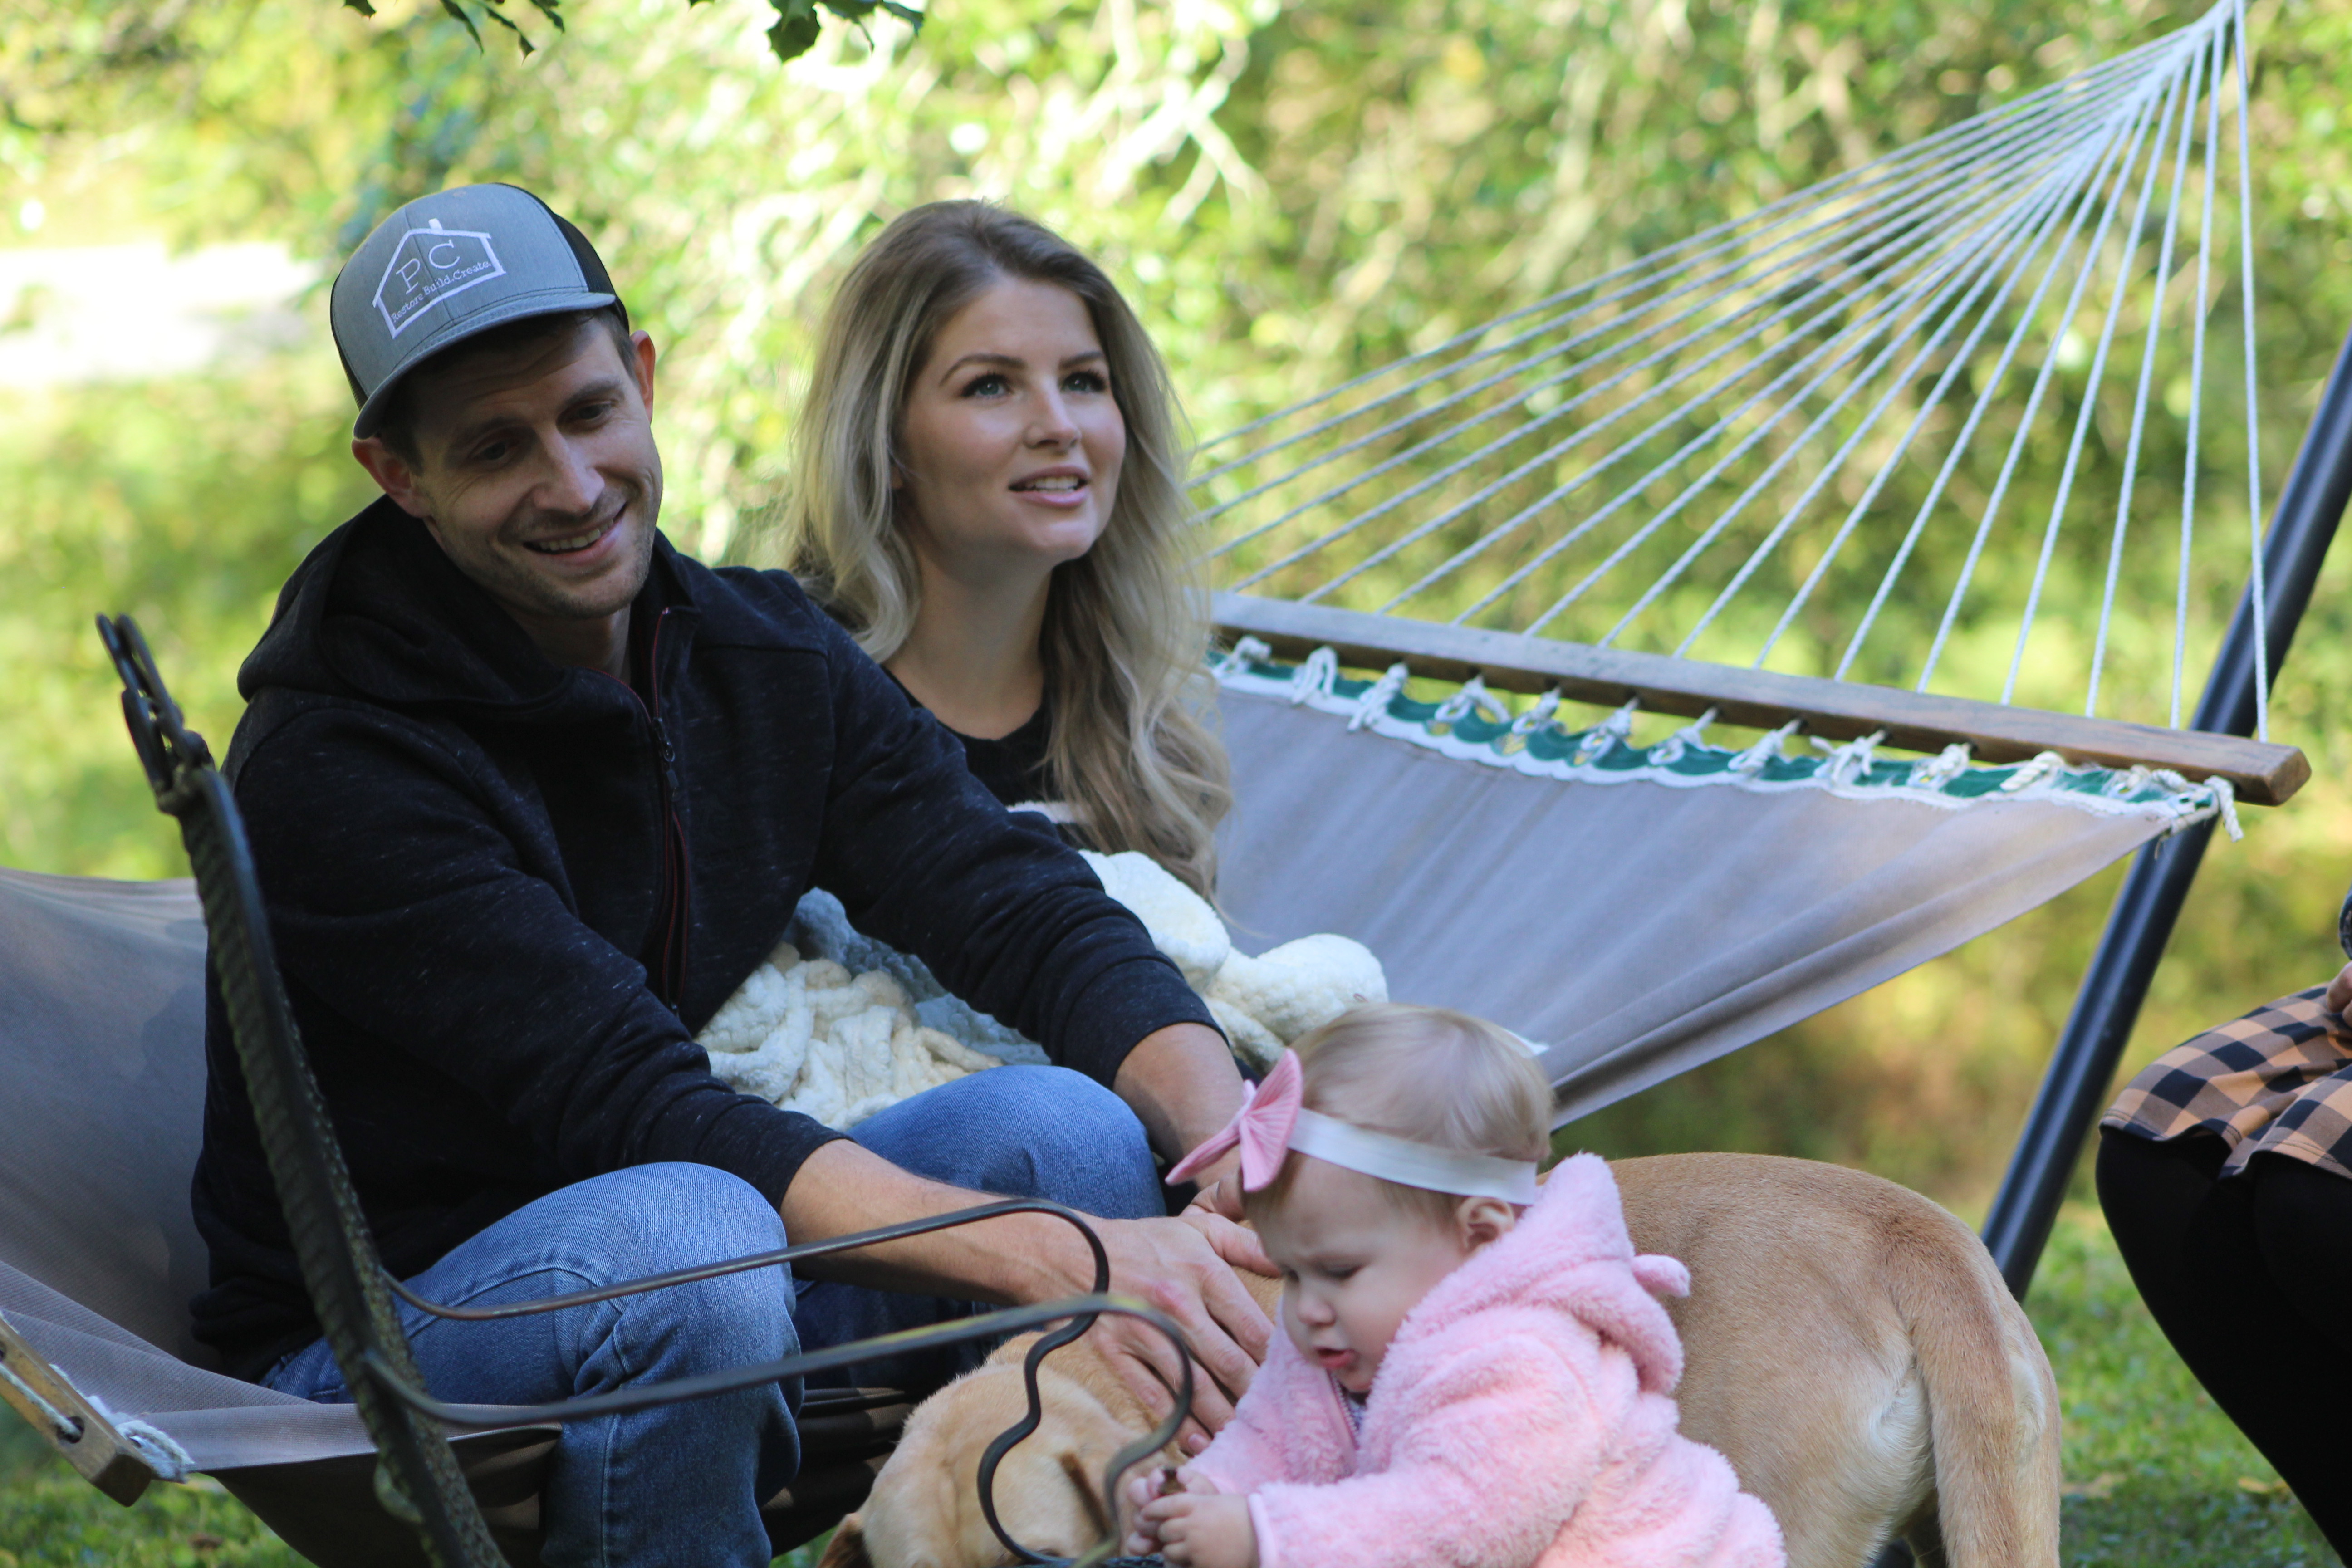 Couple sitting on hammock with baby in scene from 'Bringing Up Bates' Season 10